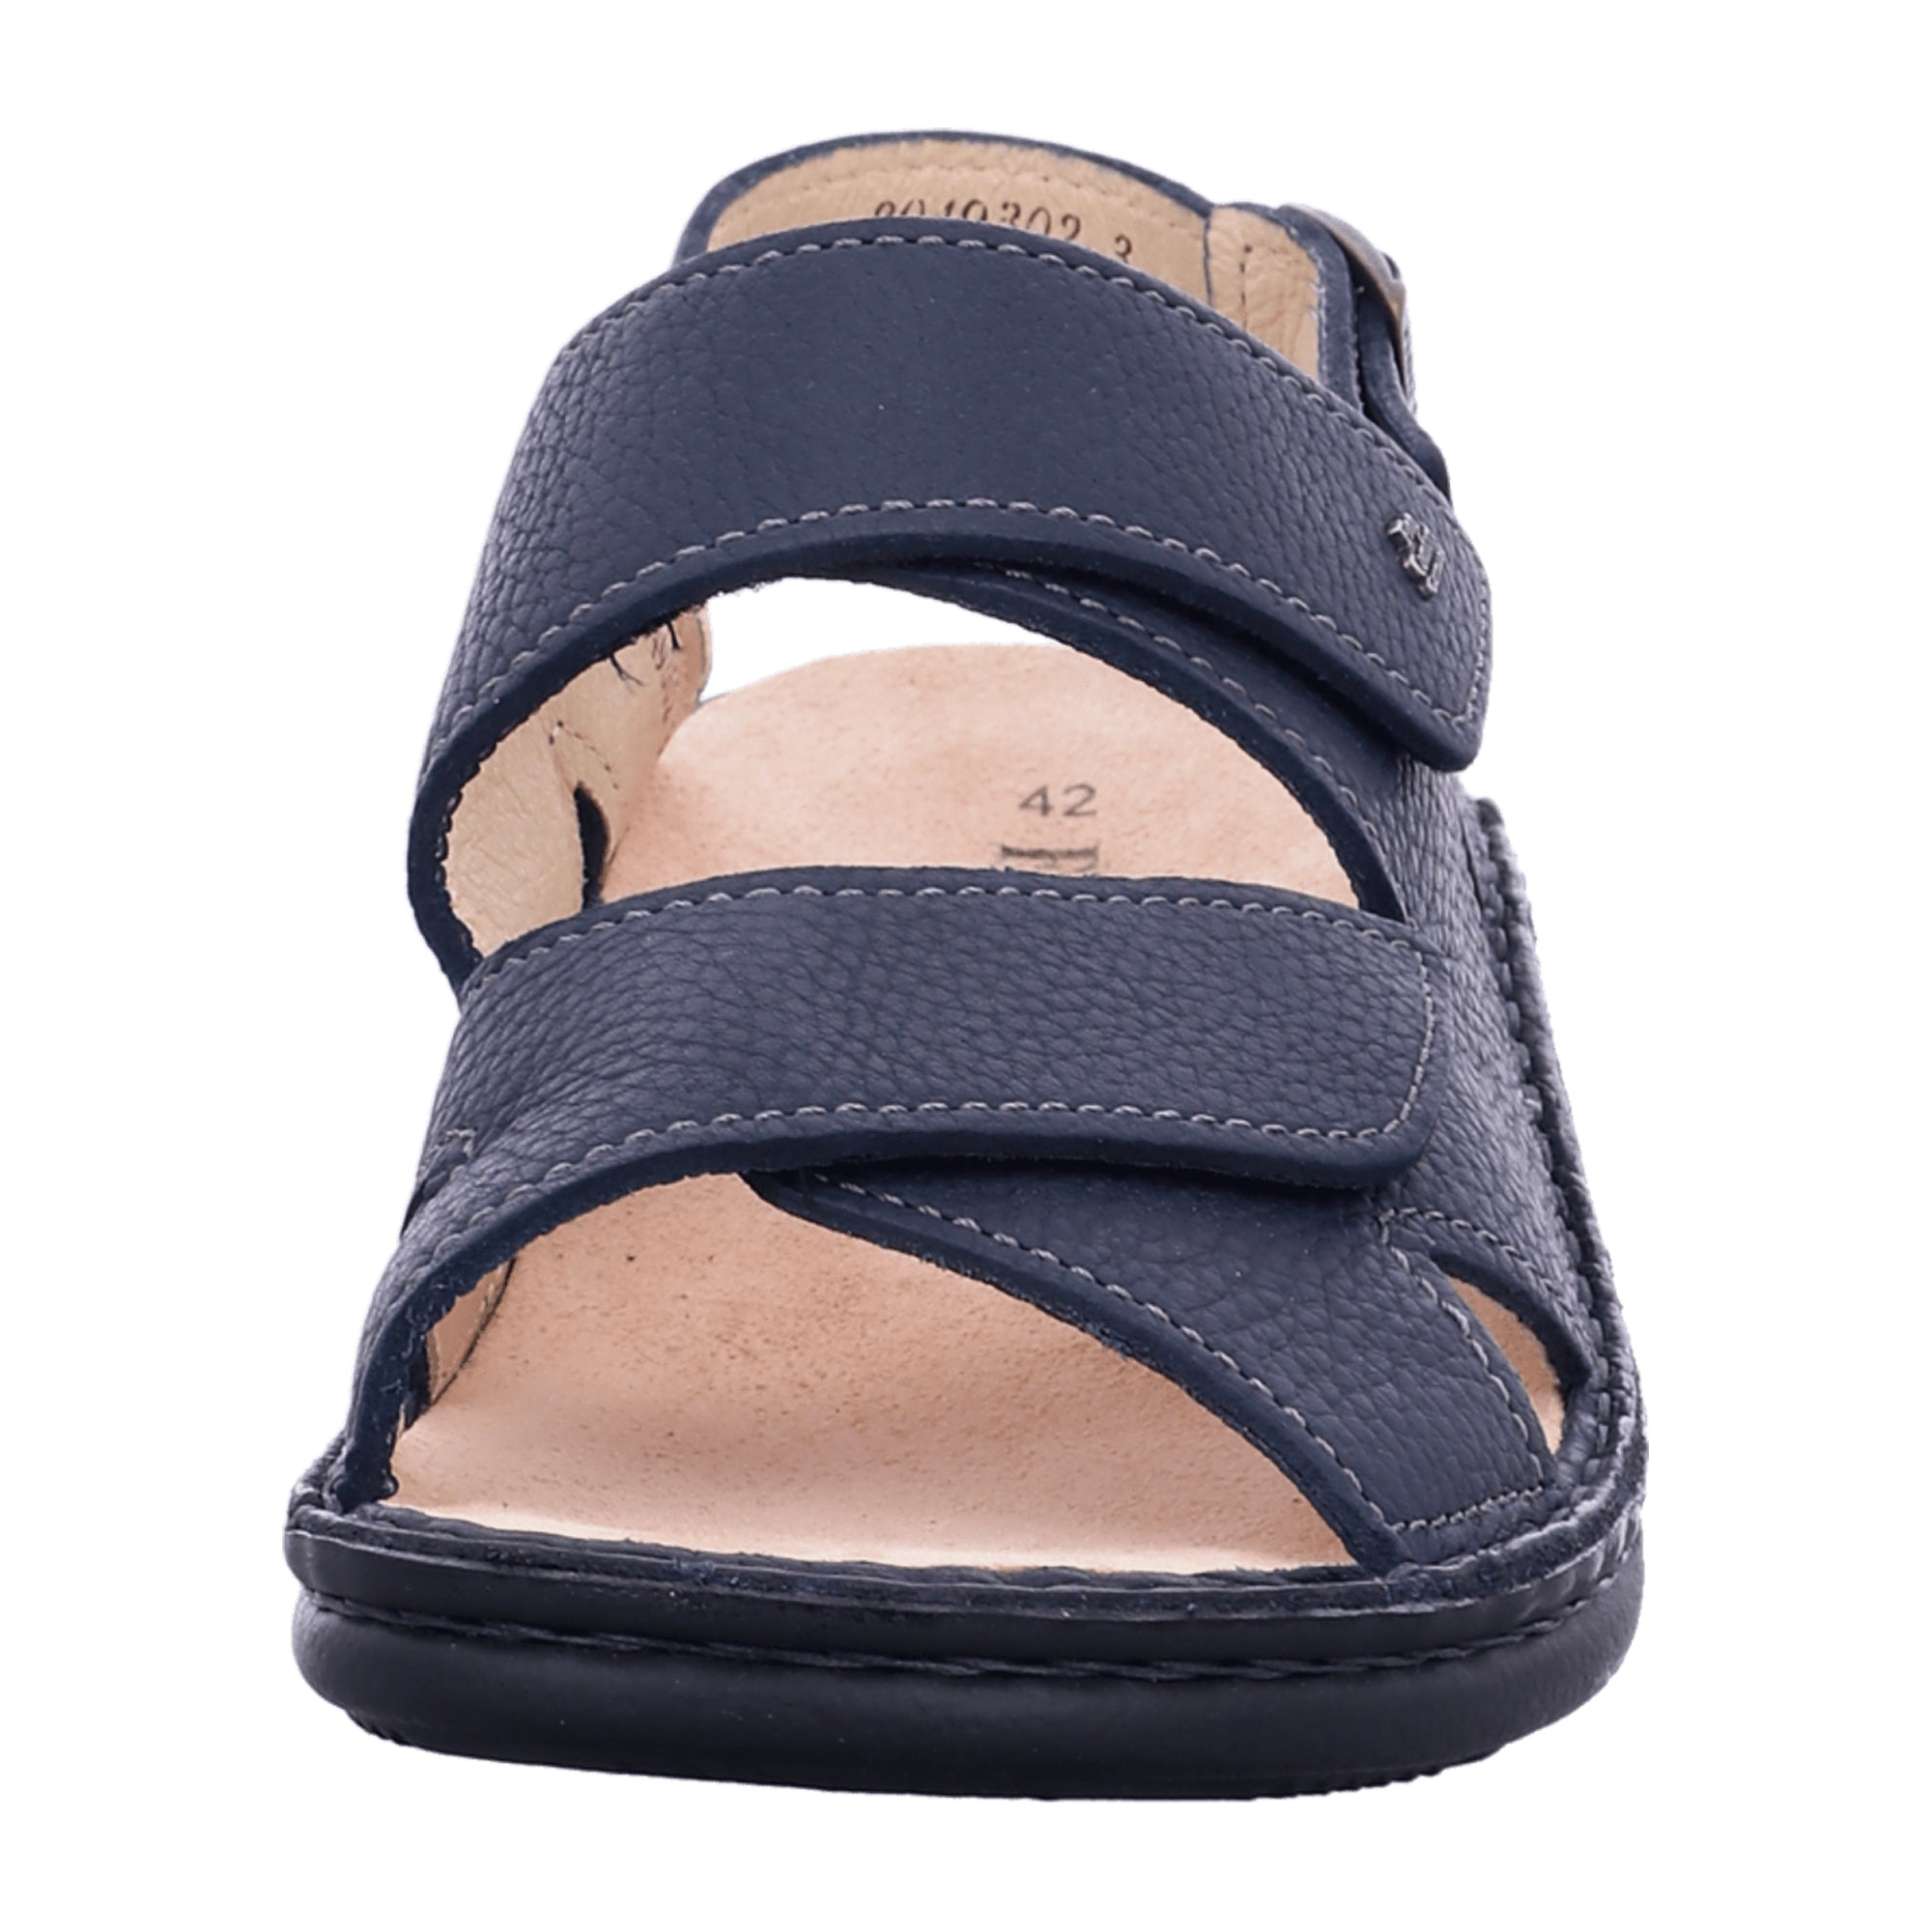 Finn Comfort Toro-Soft Men's Sandals - Night Blue Comfortable Leather Sandals with Adjustable Straps